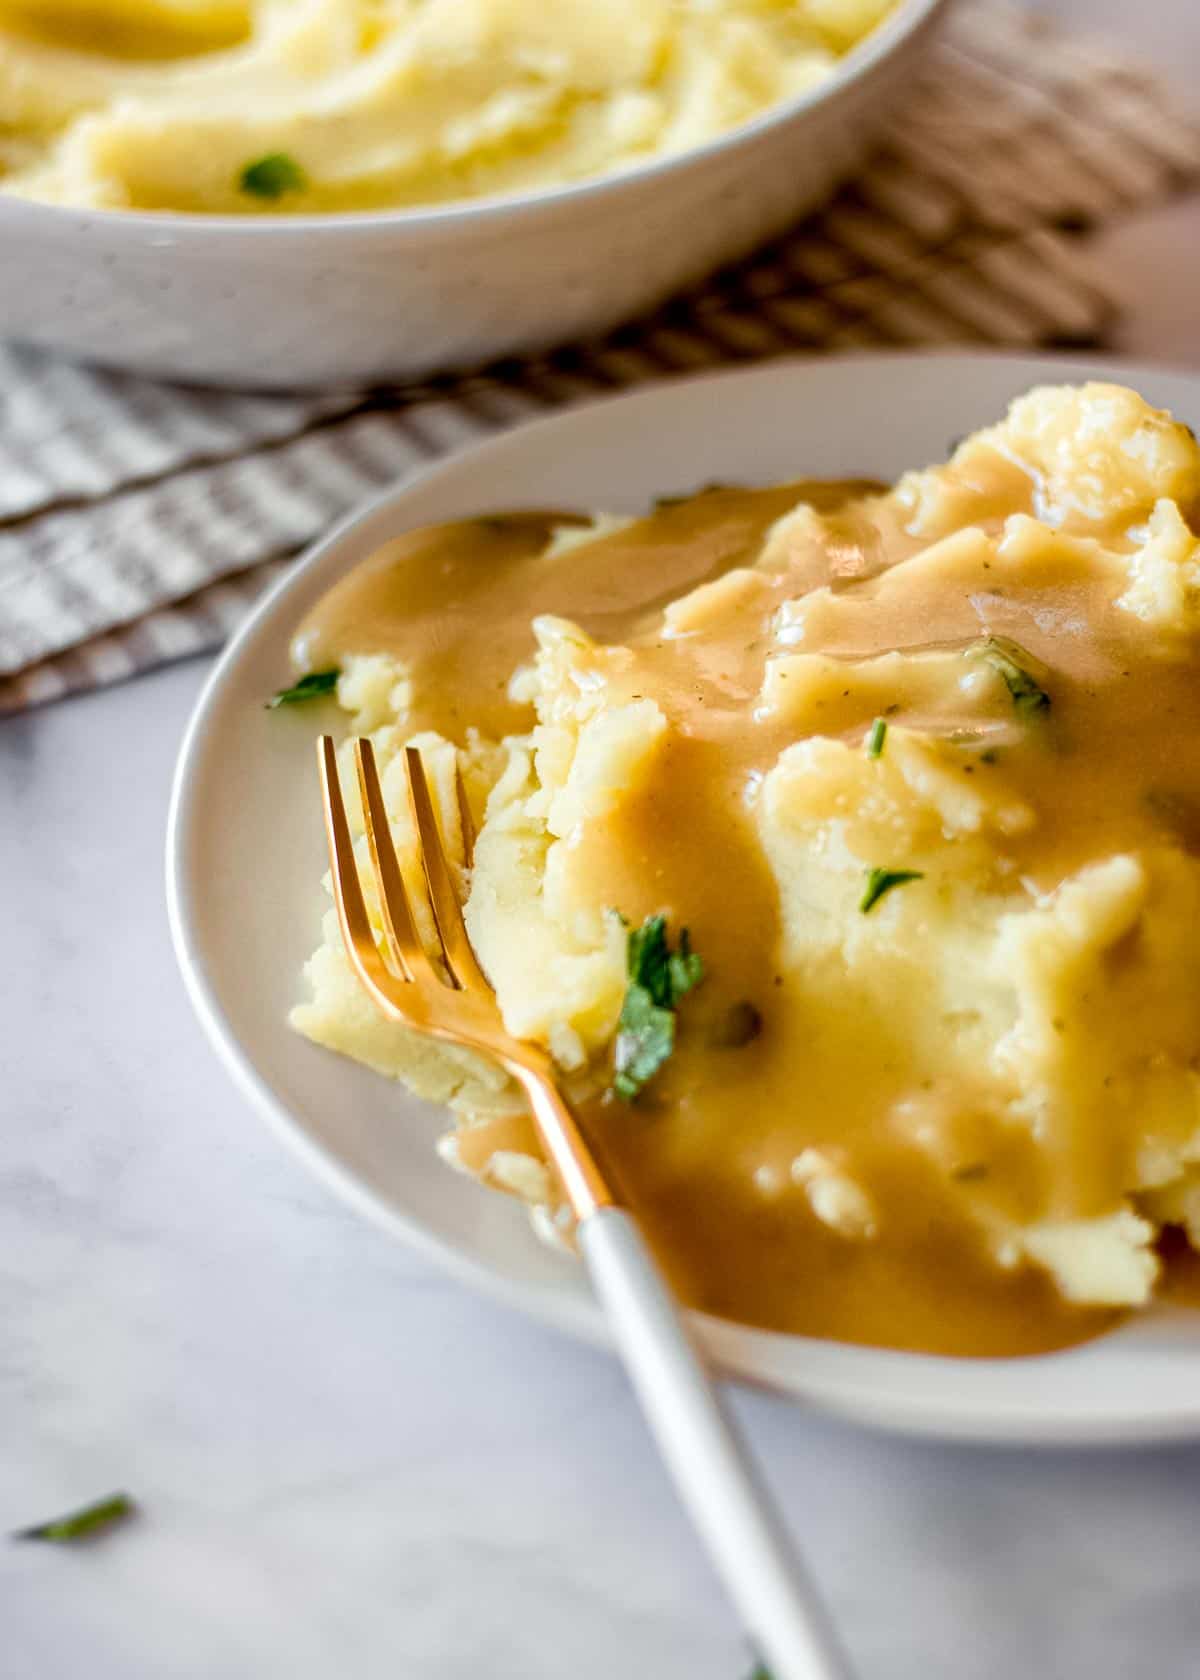 A plate of mashed potatoes and seriously easy vegan gravy with a golden fork.